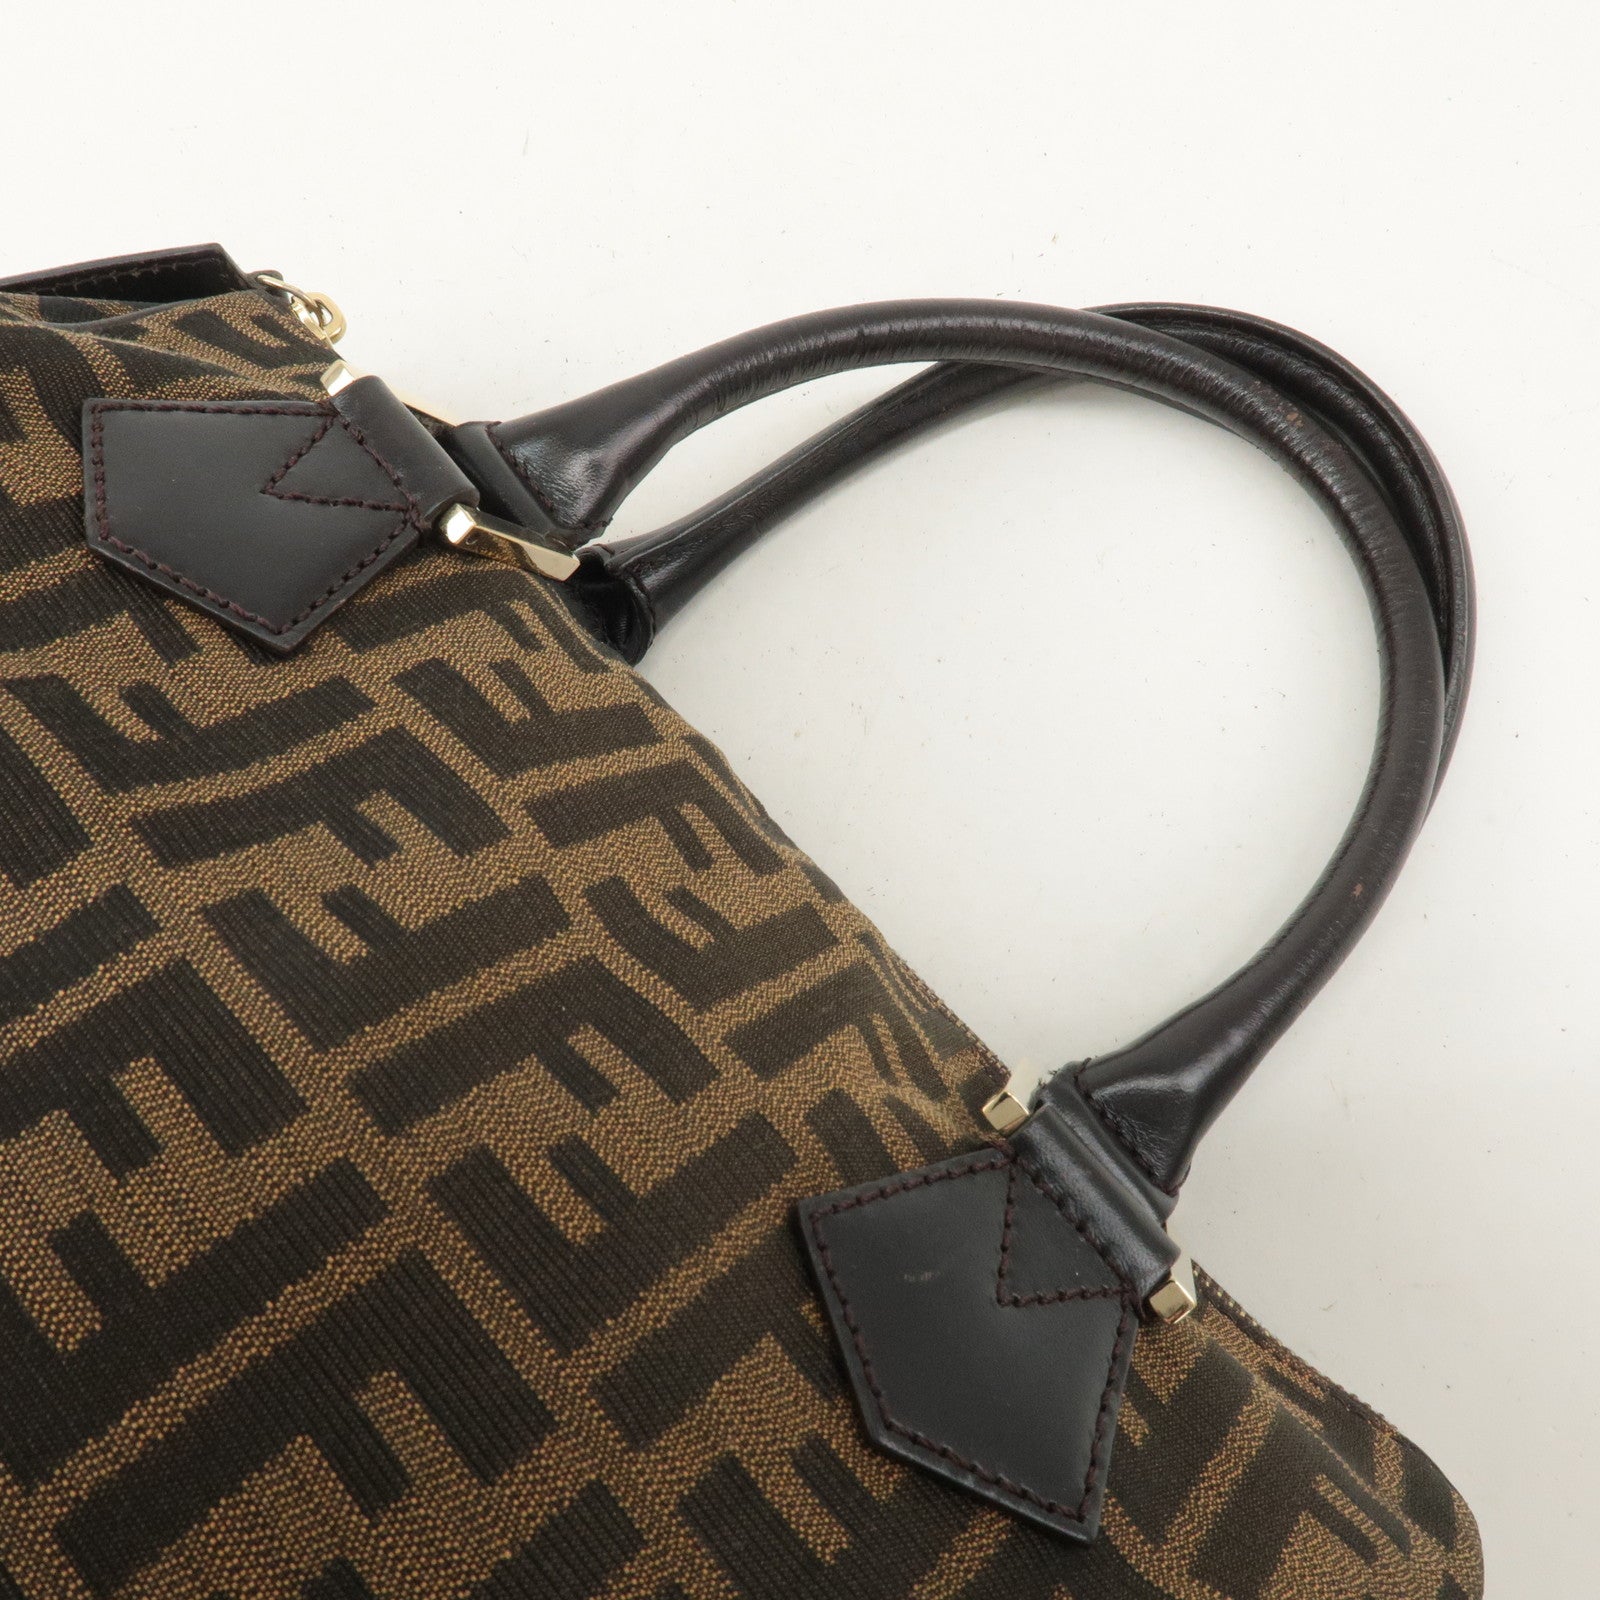 FENDI - Zucca - Speaking of supermodels with Fendi bags - Leather ...